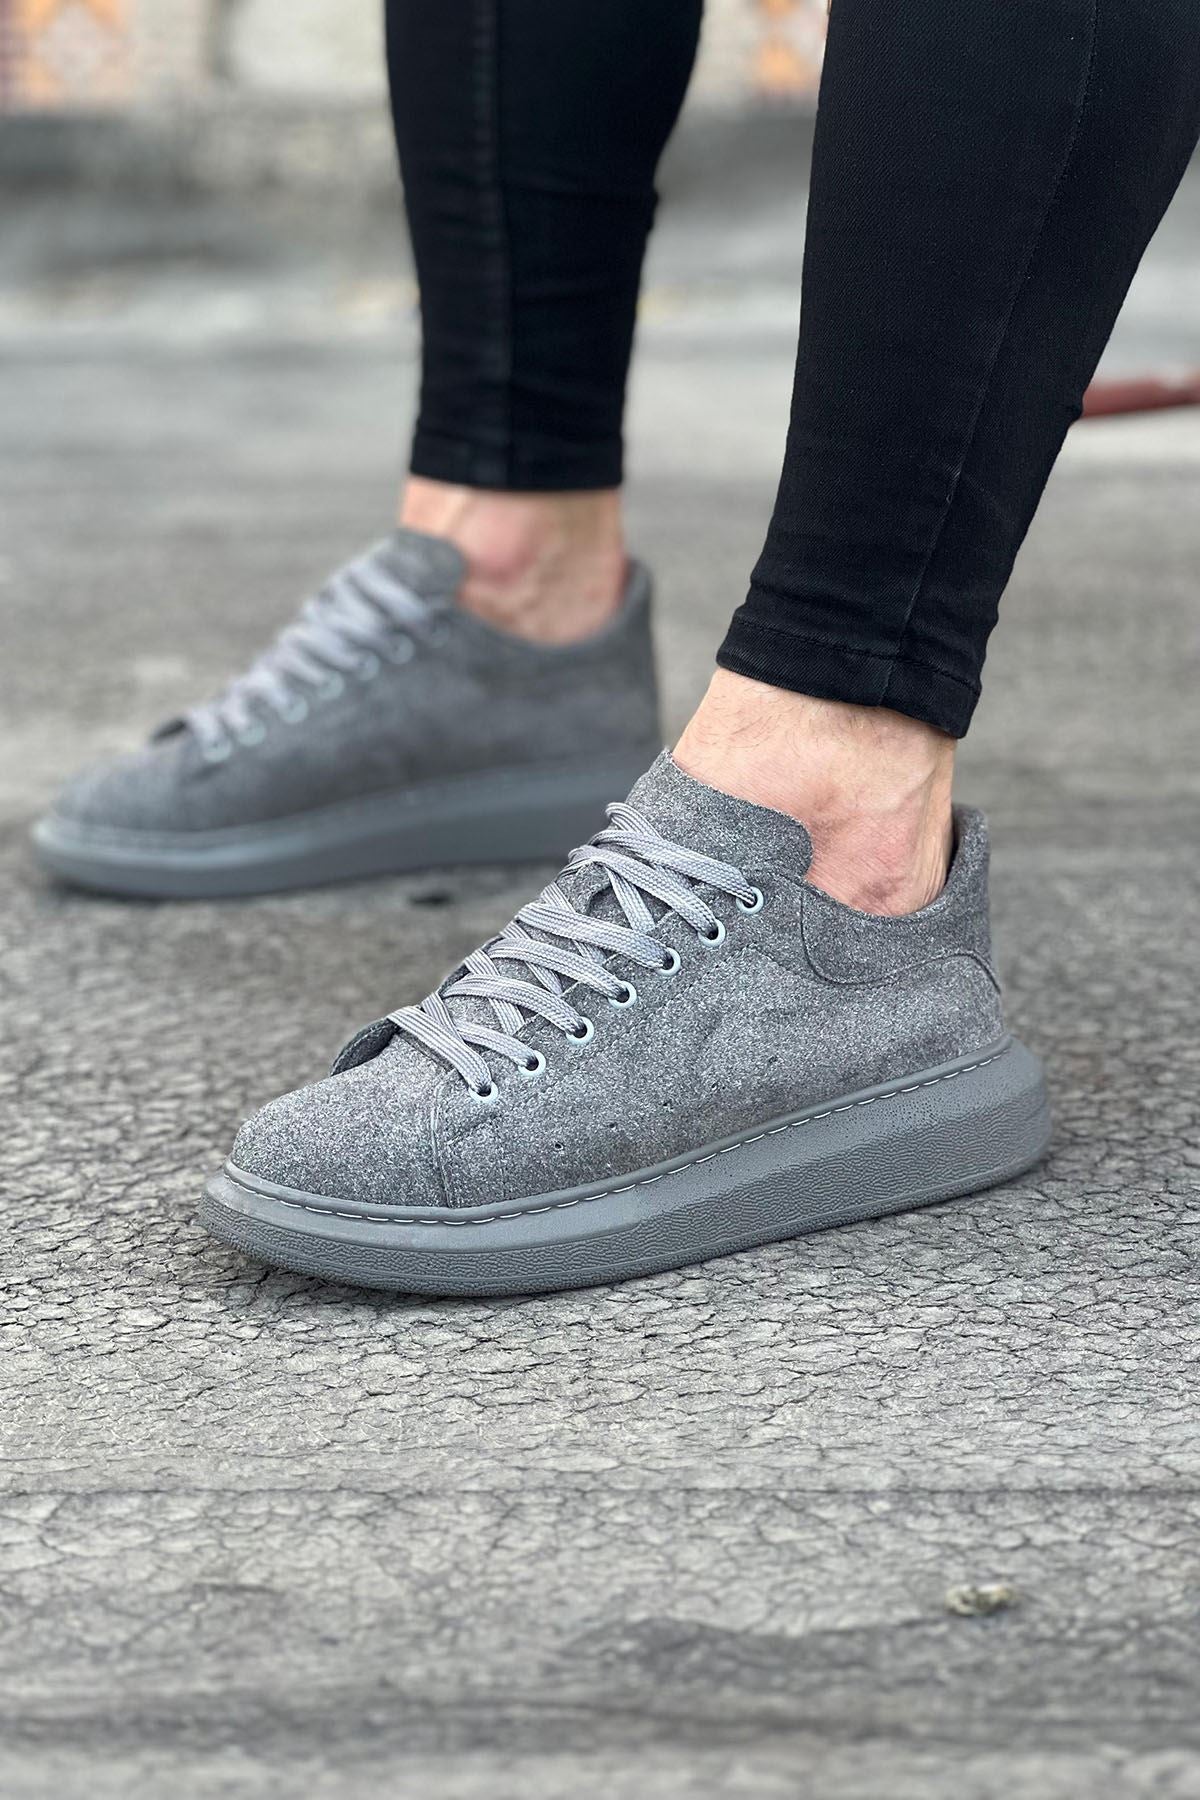 WG096 Gray Suede Daily Men's Casual Shoes - STREETMODE™